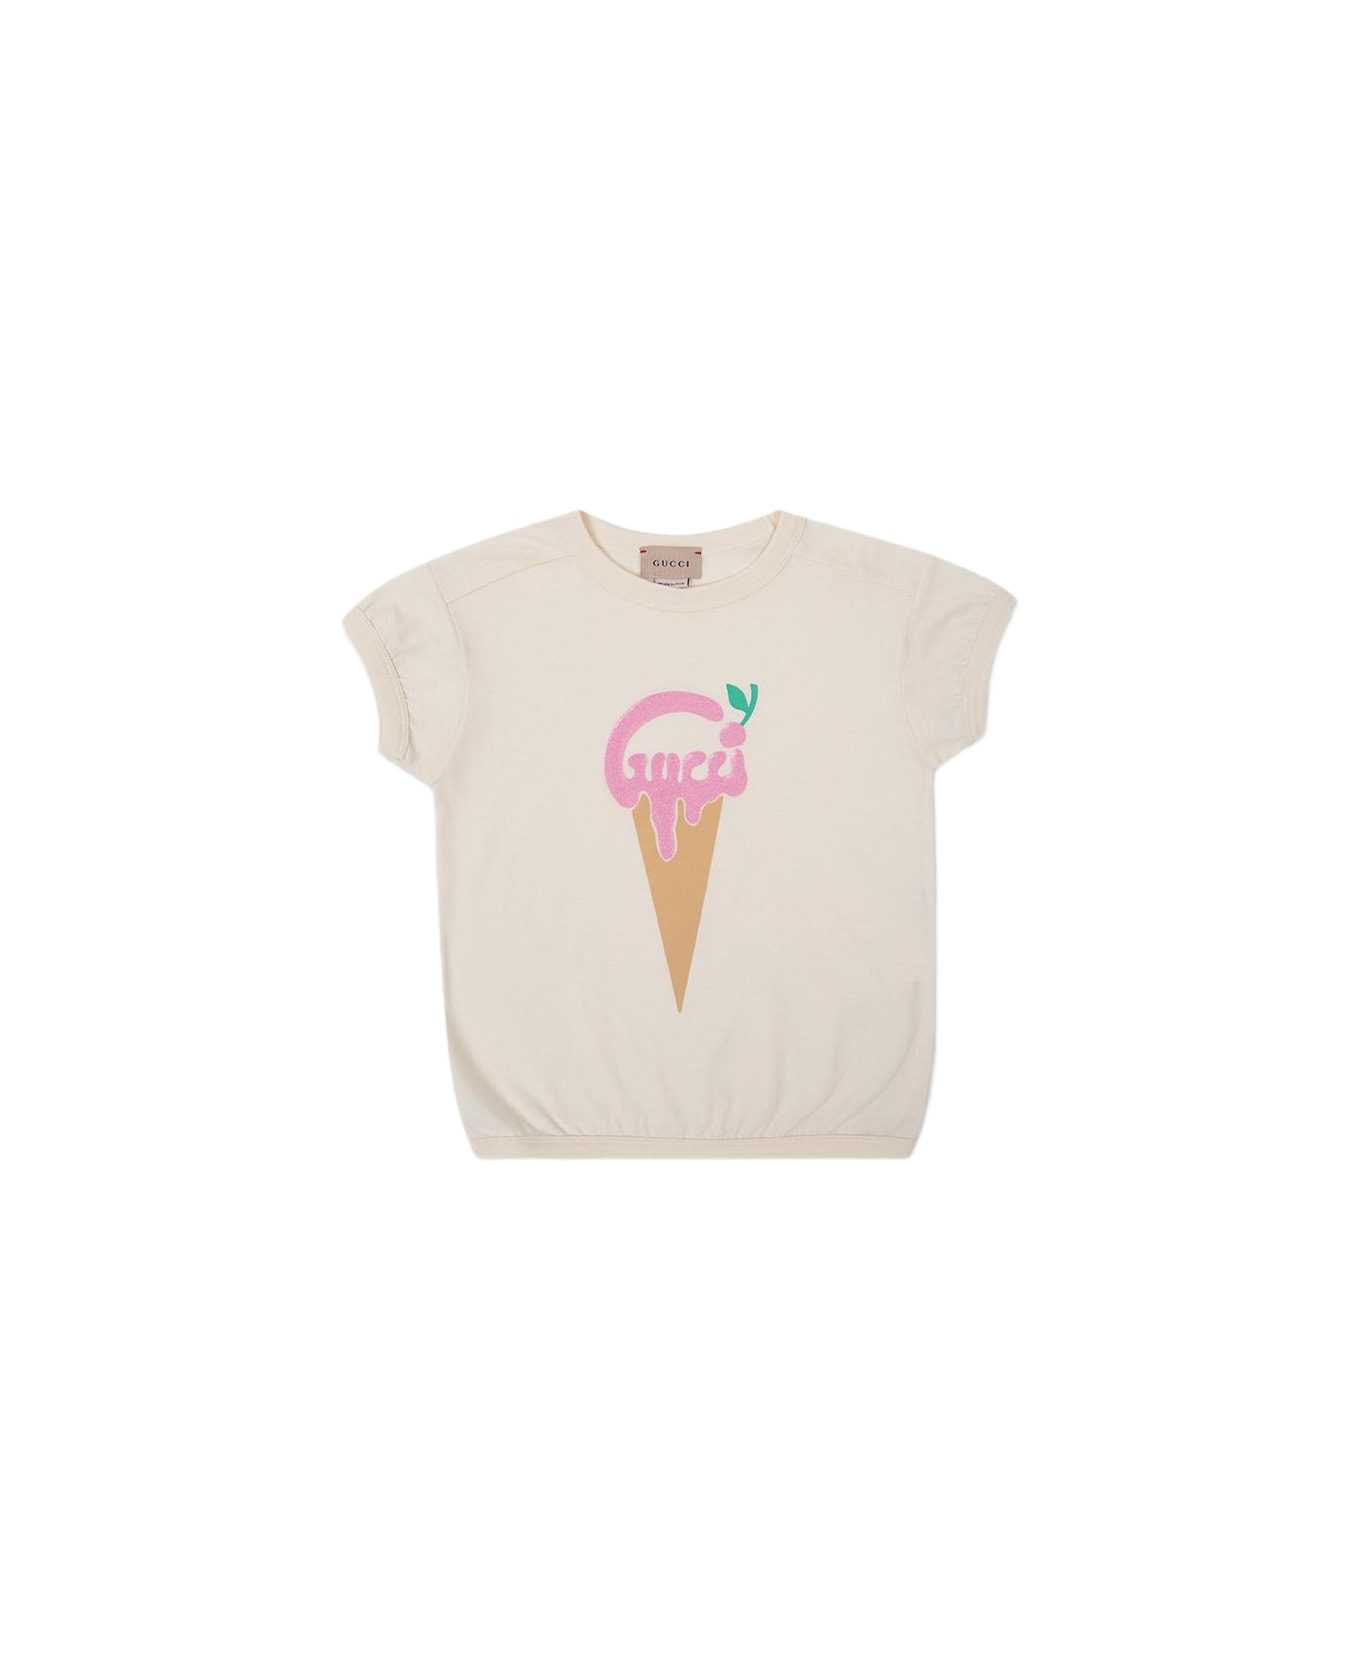 Gucci Printed T-shirt - Sunkissed